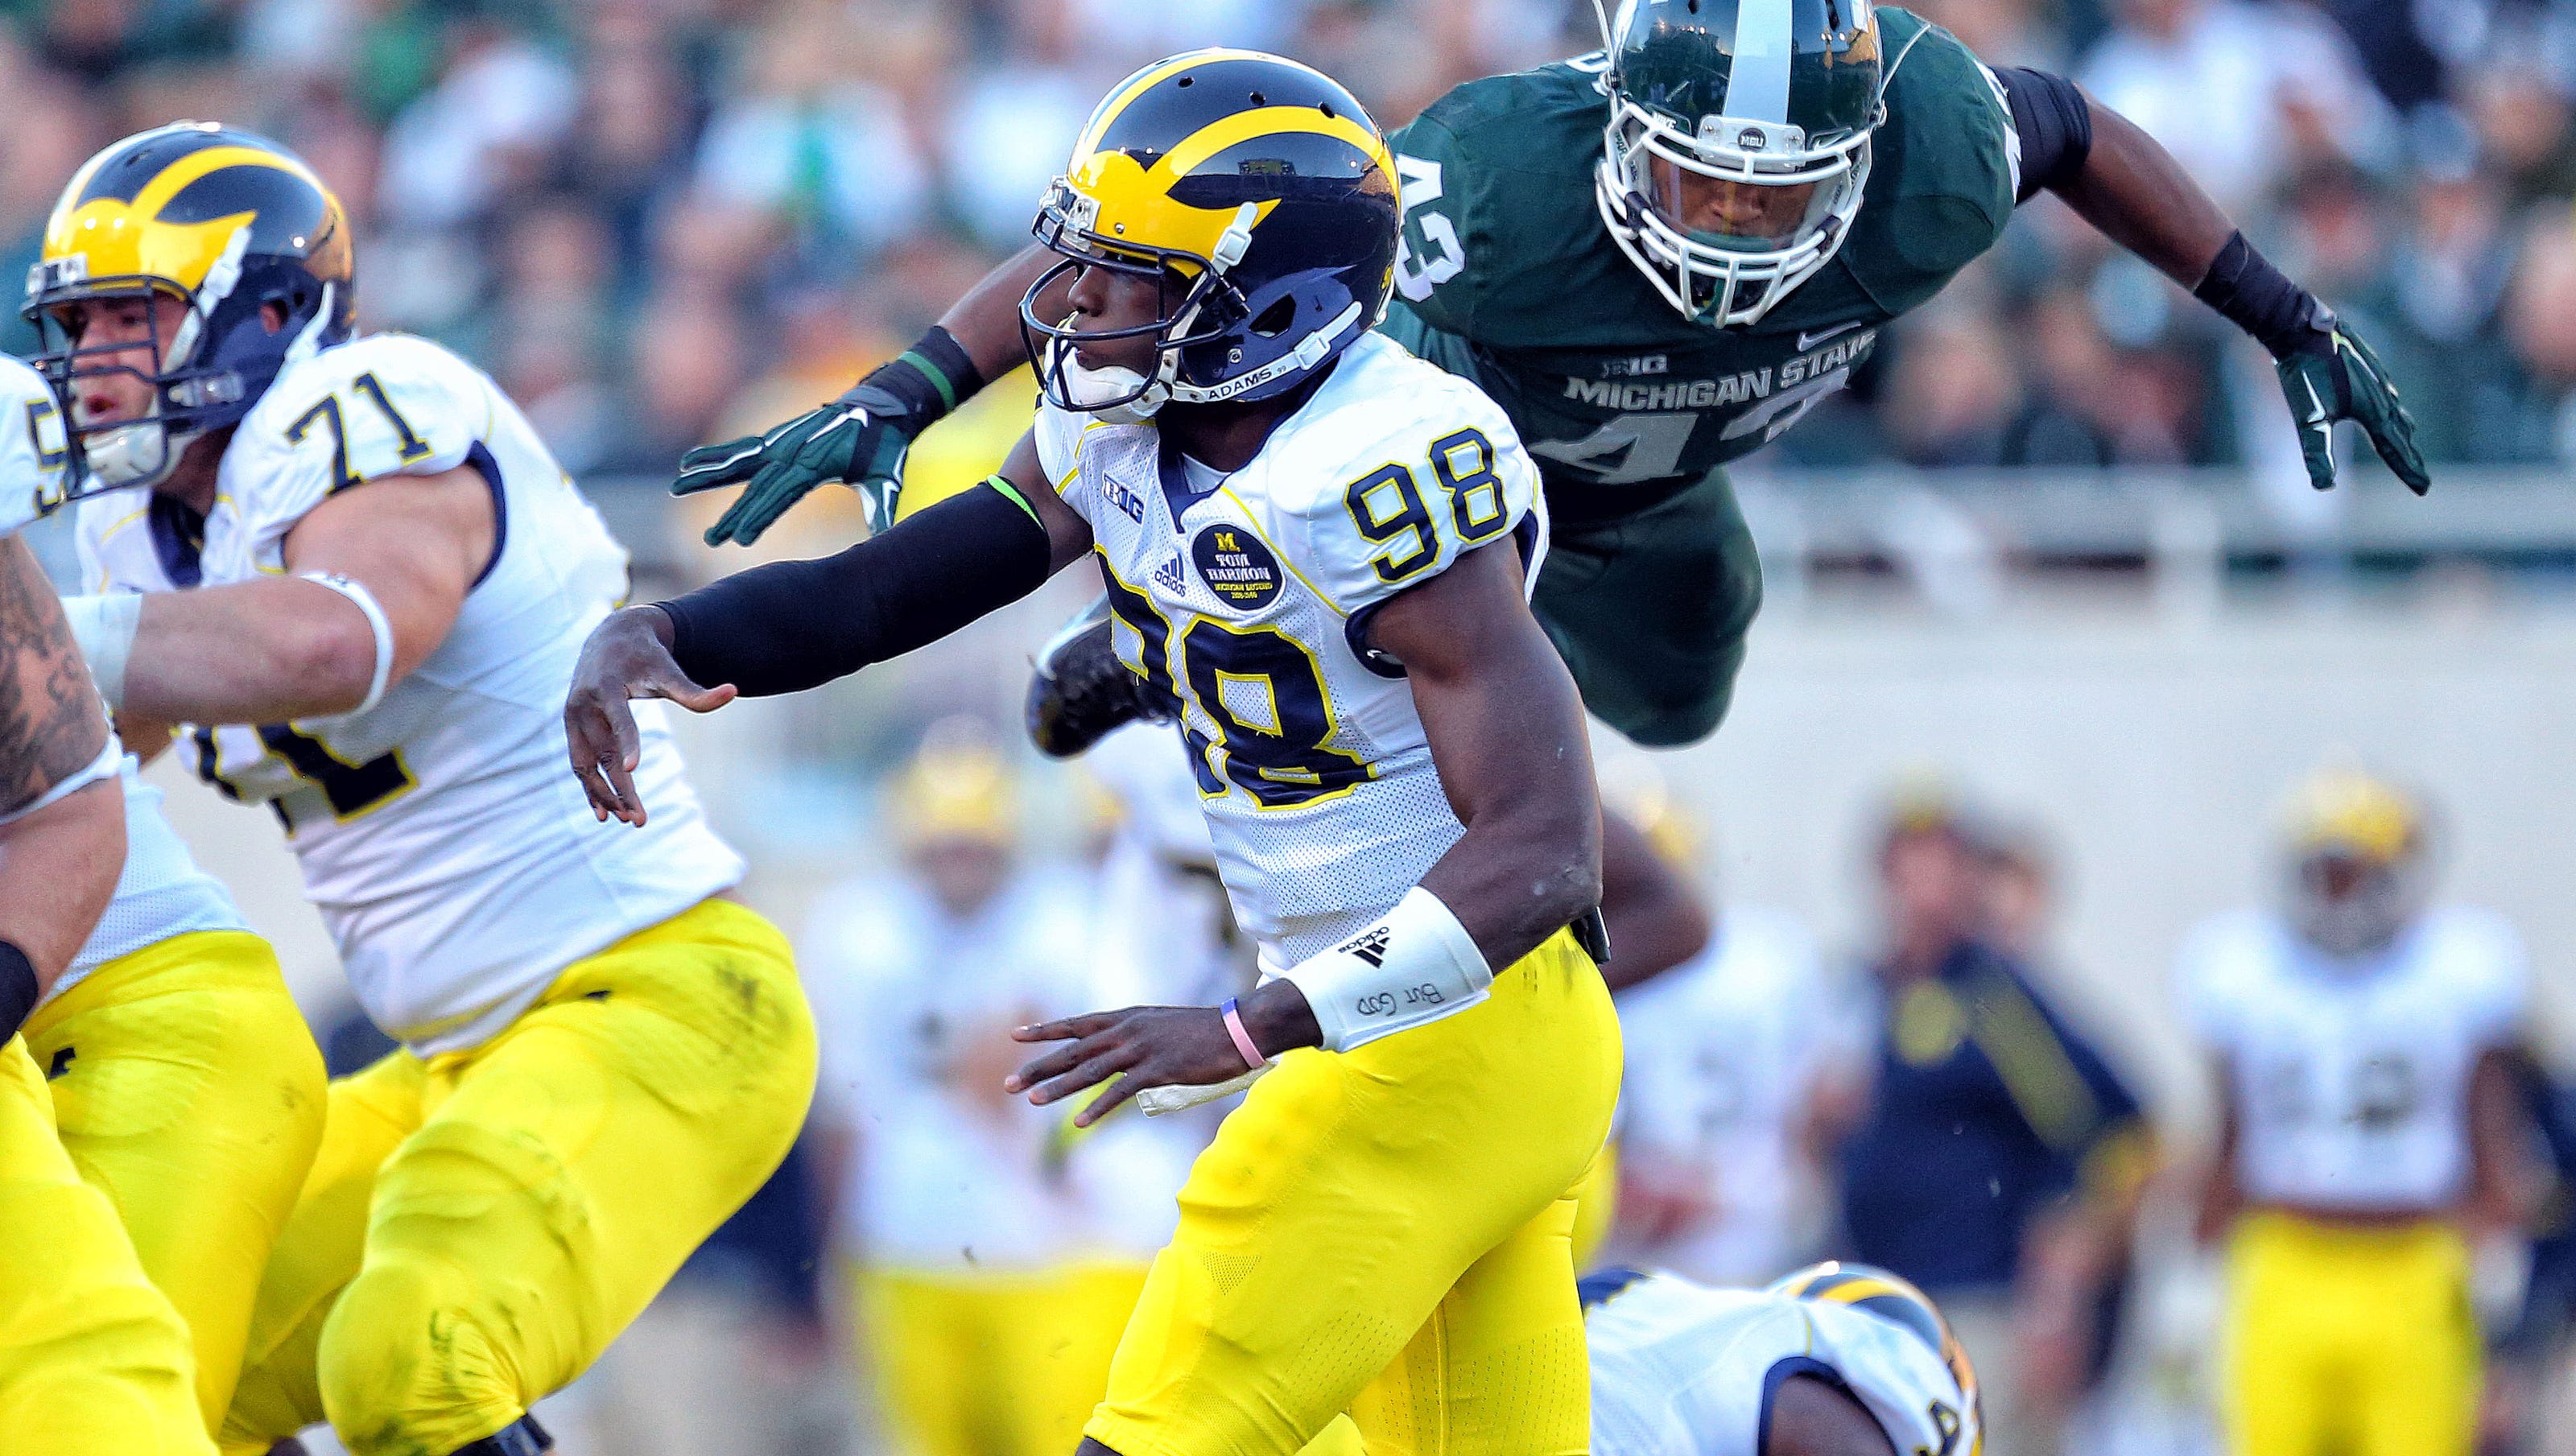 One-play return from injury has MSU linebacker Ed Davis ready for more